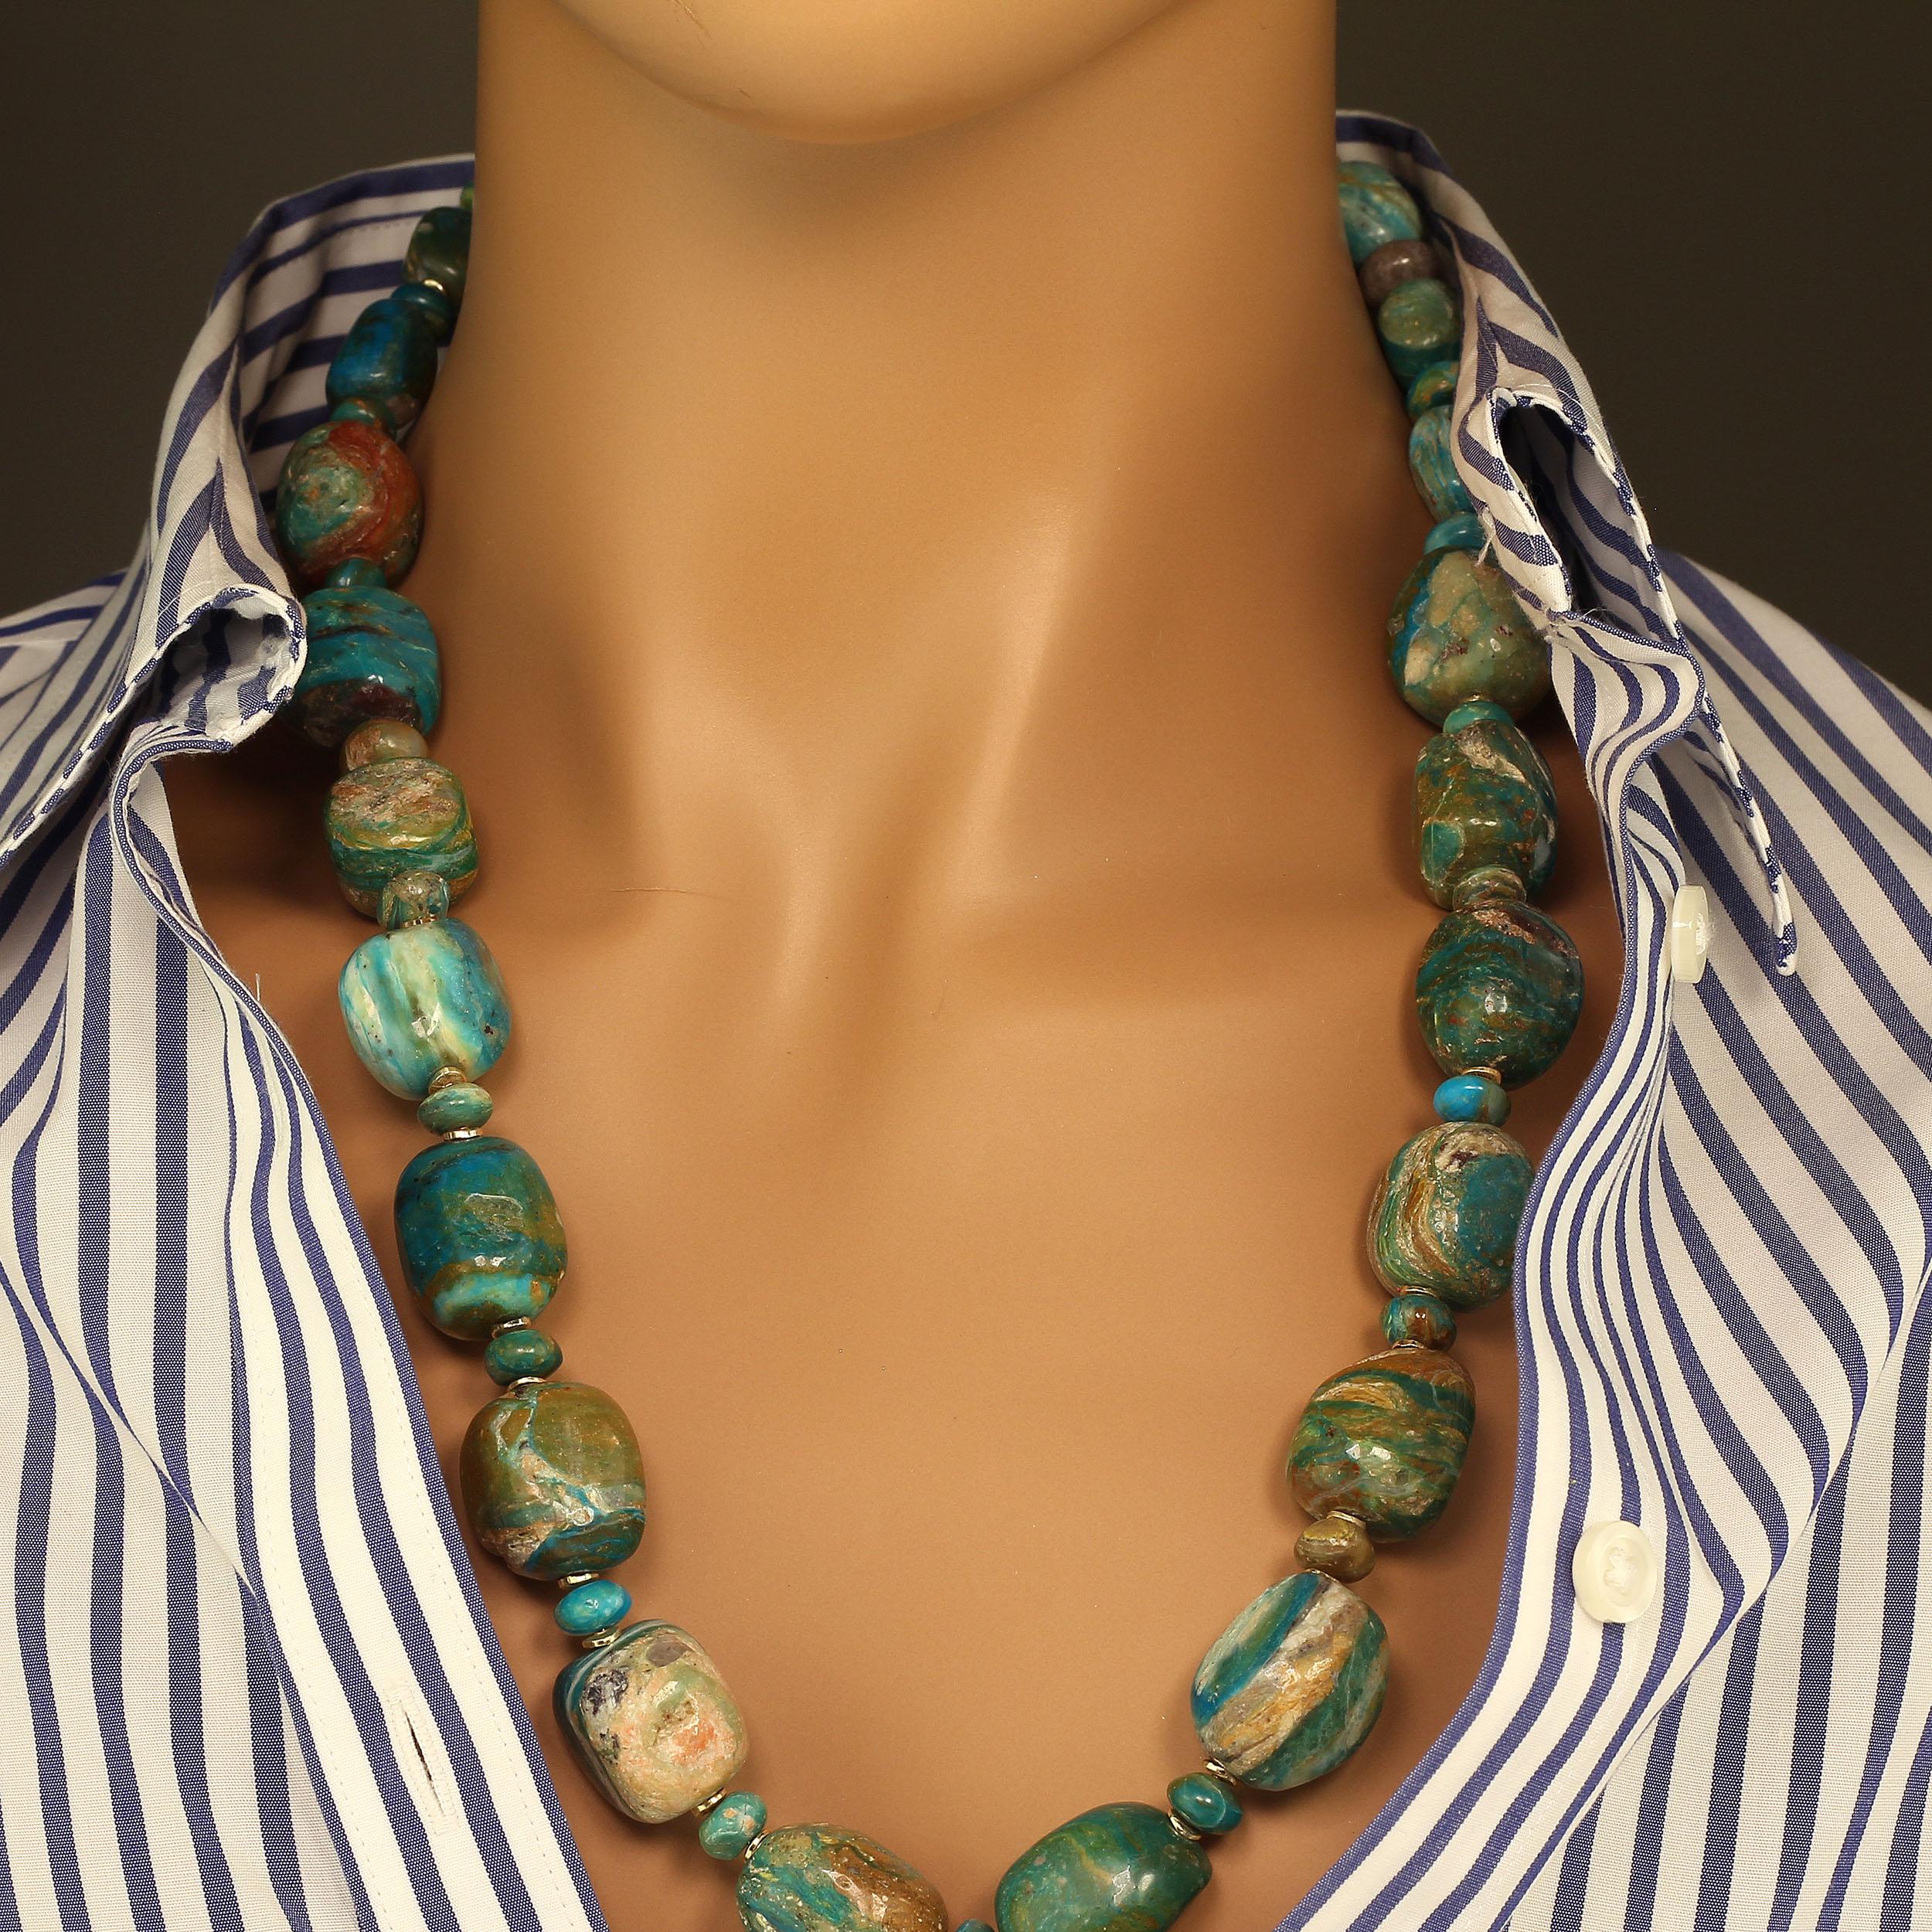 Fun and Funky highly polished blue and tan Peruvian Opal rustic necklace.  These graduated beads, 13-22 MM, are each unique in color gradation and shape.  Some are more rounded, some more squared off.  The small rondelles between the cubes are less